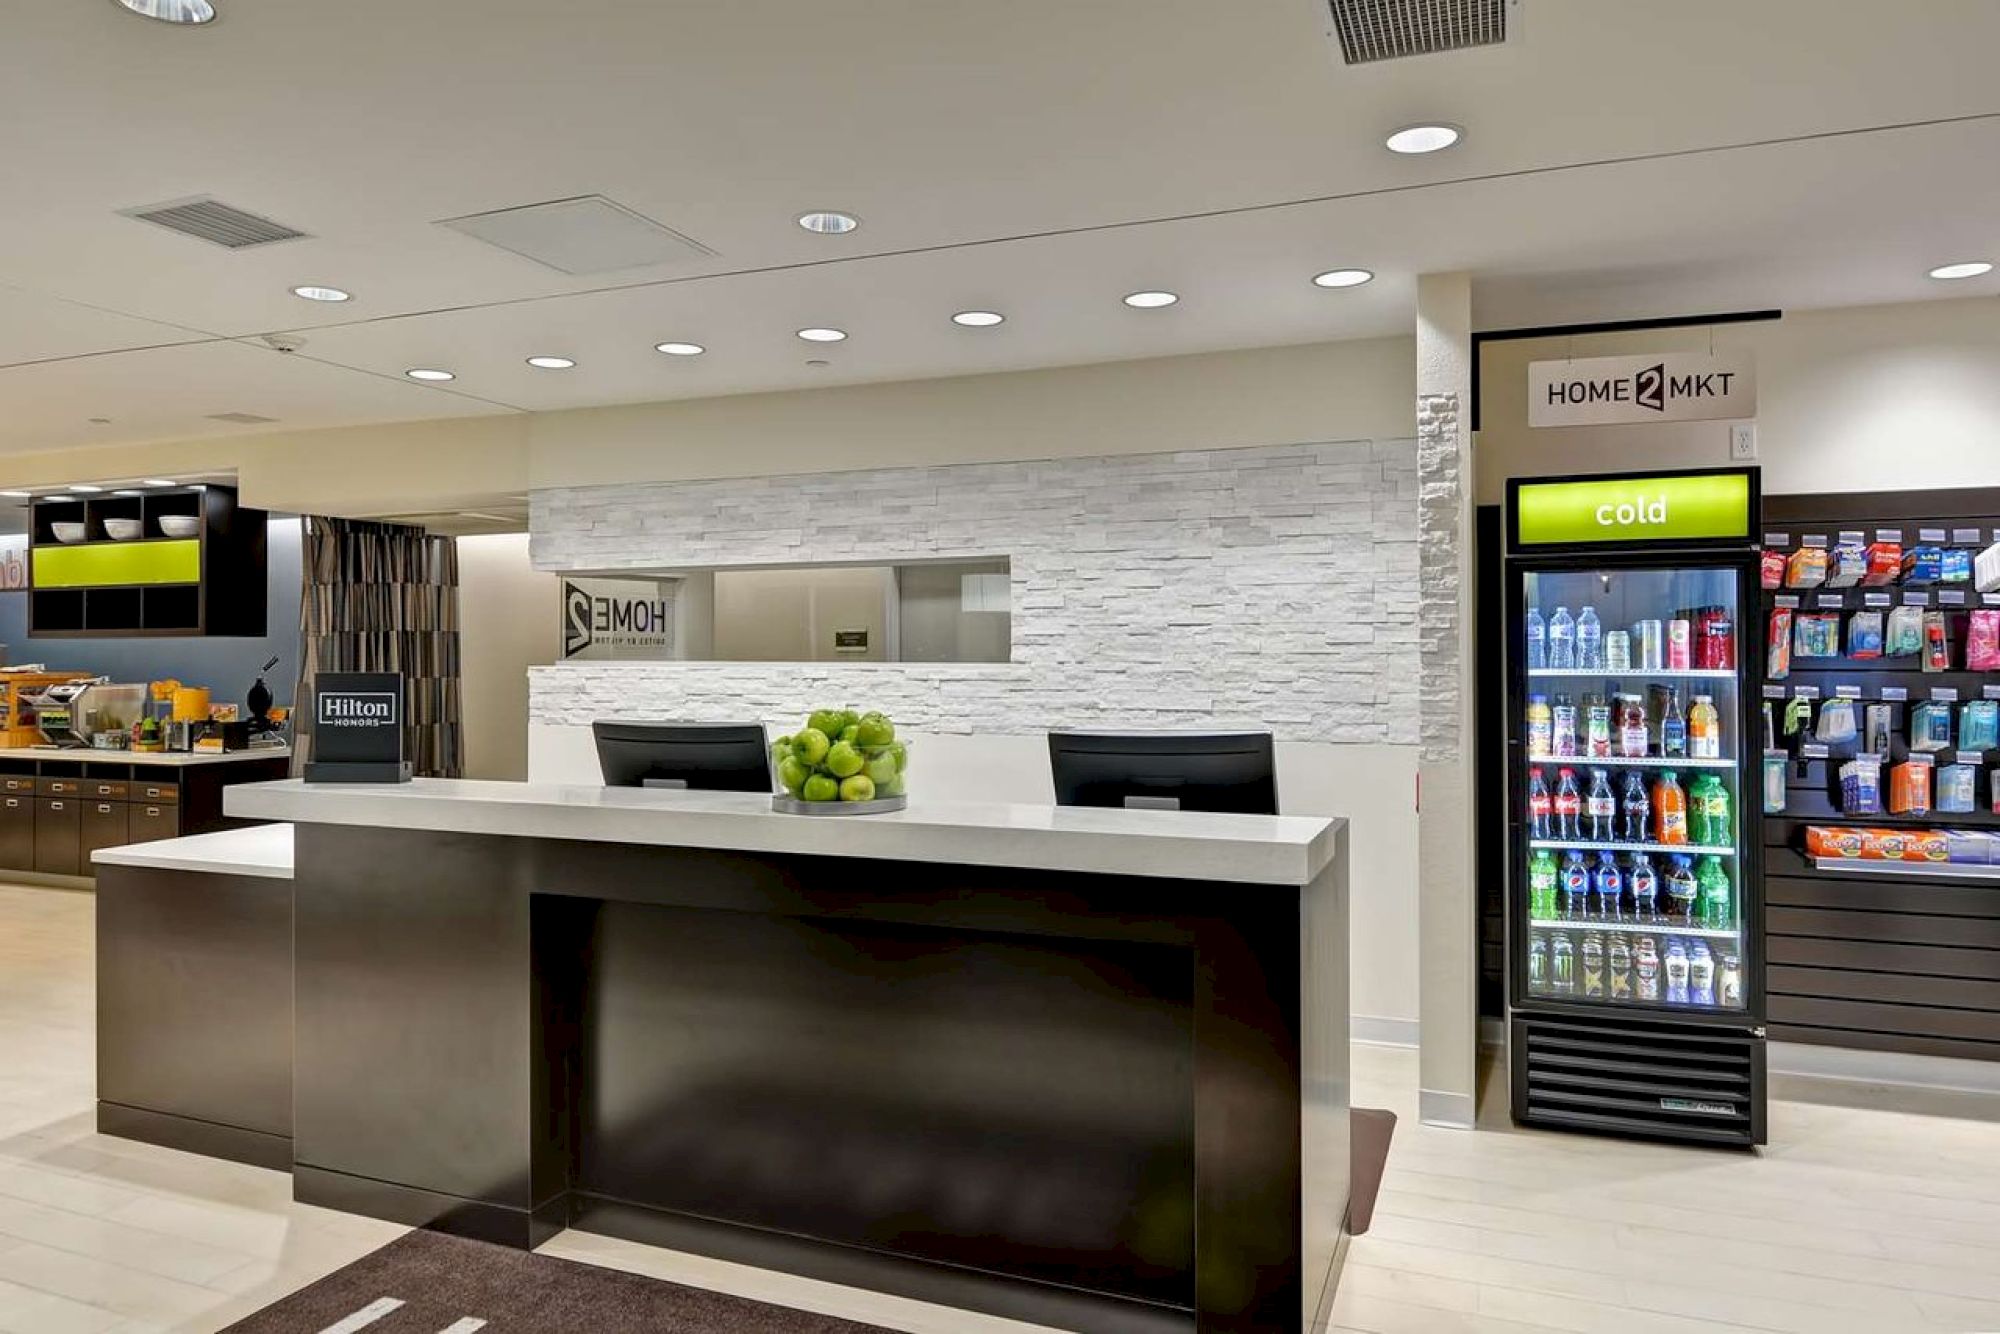 This image shows a modern hotel reception with two black counters, a bowl of green apples, a drink/snack vending machine, and a sign that reads 